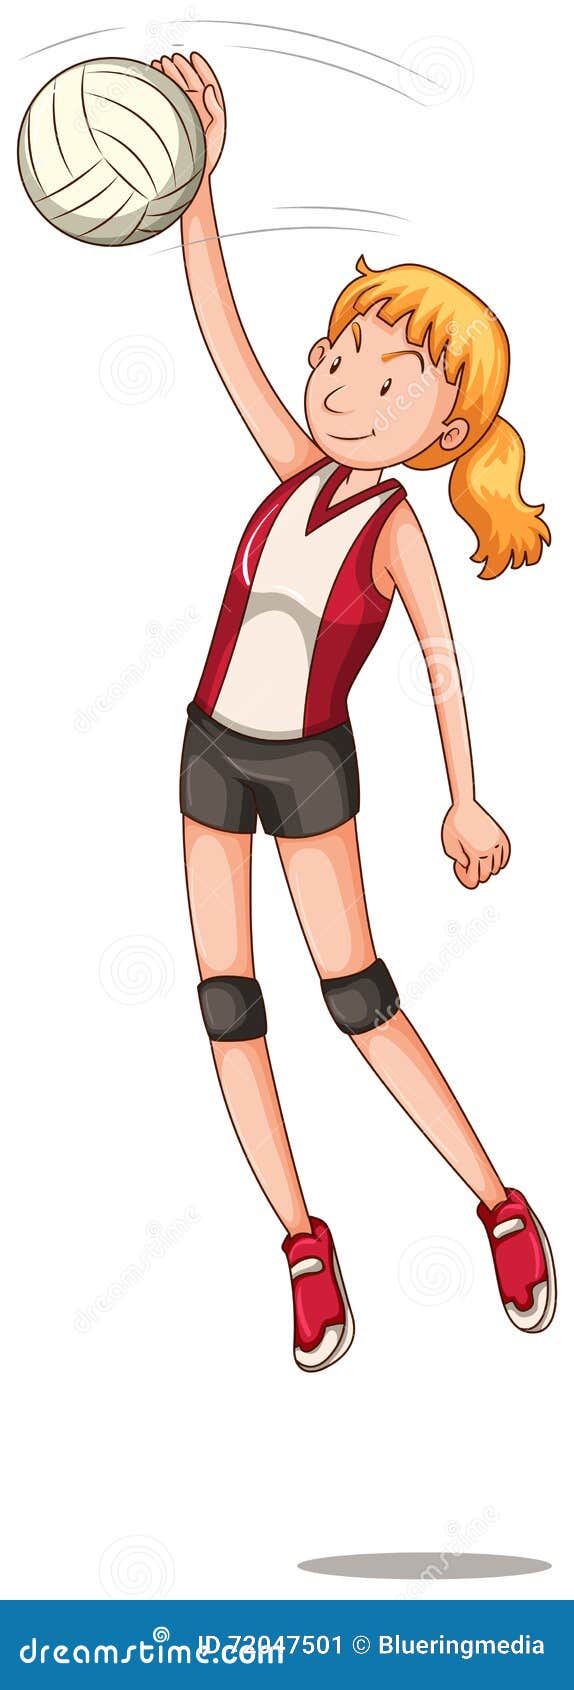 Woman Volleyball Player Hitting Ball Stock Vector - Illustration of ...